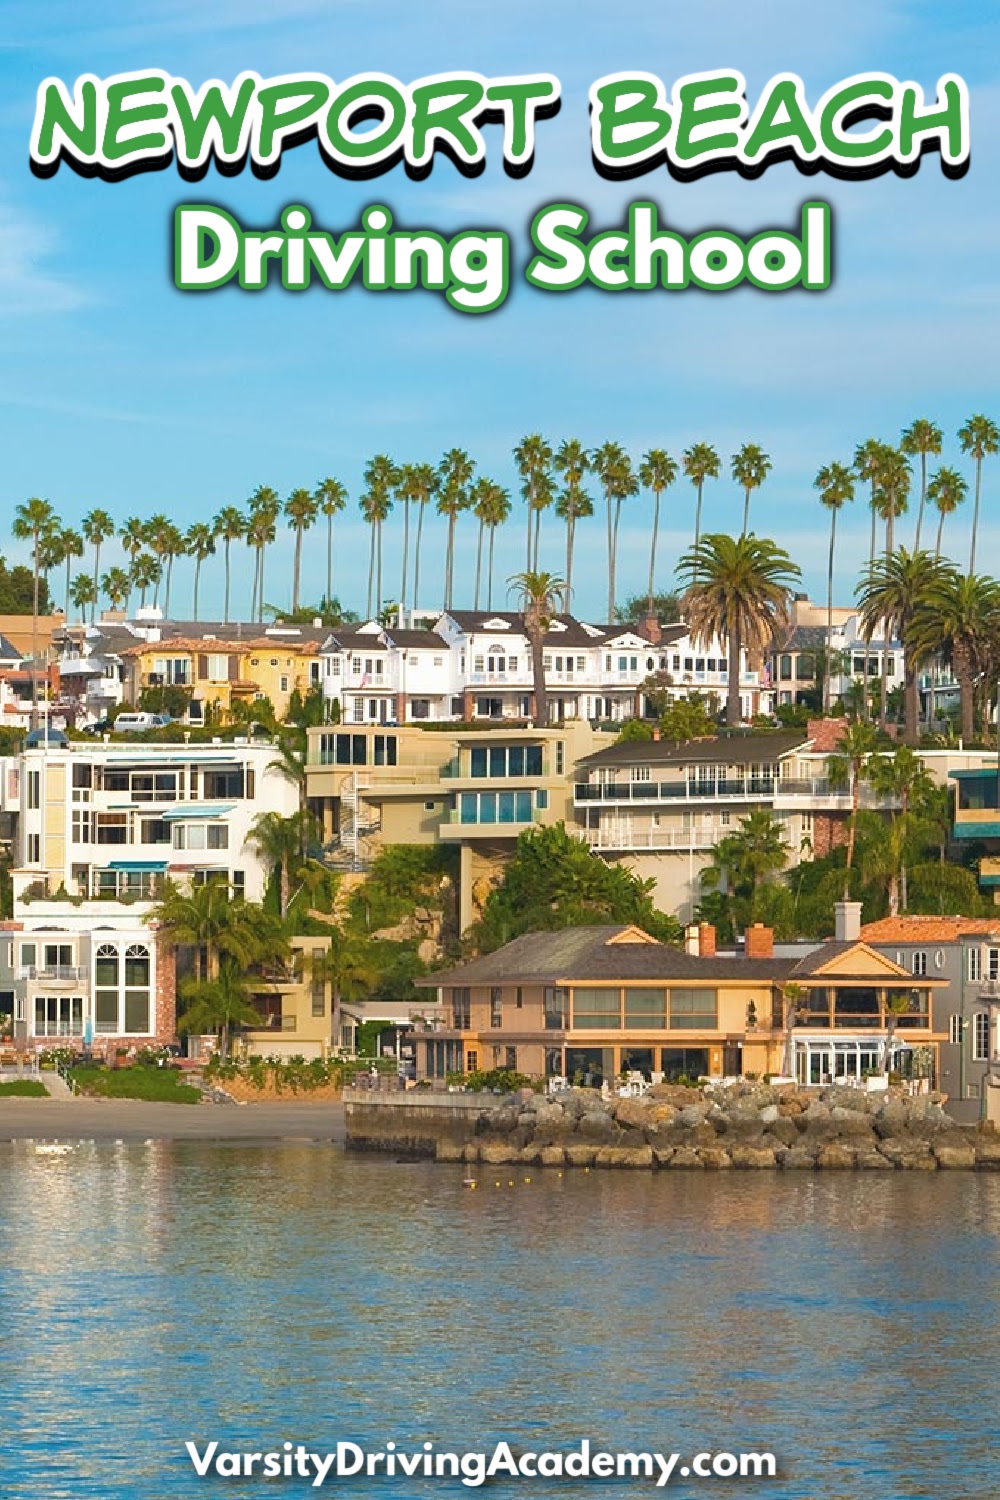 Varsity Driving Academy is the best Newport Beach driving school for teens and adults who want to learn how to drive defensively.